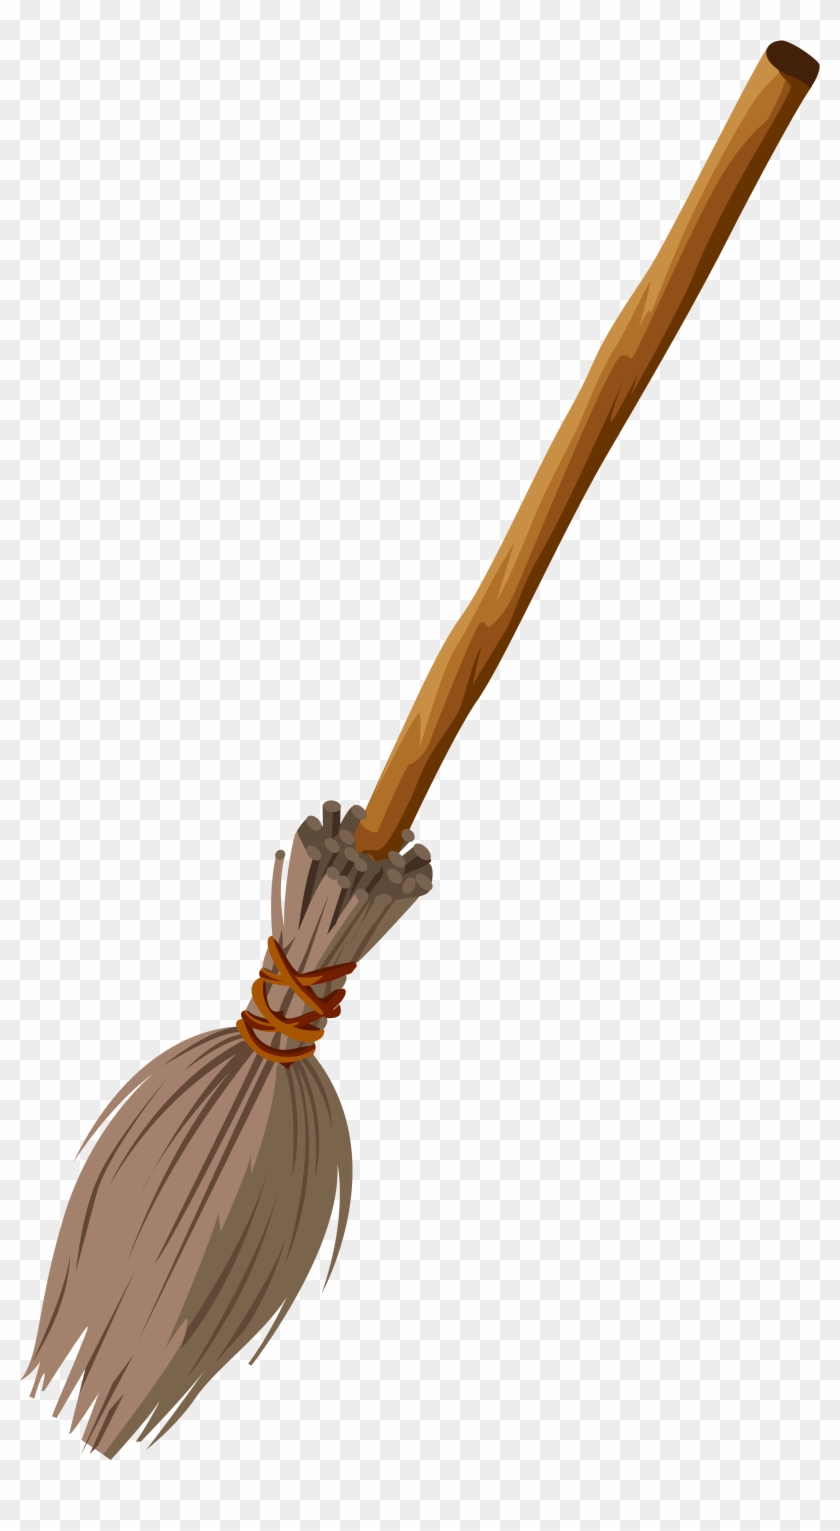 Witch Broom Transparent Clip Art Png Image - Witch Broomstick Png #942909